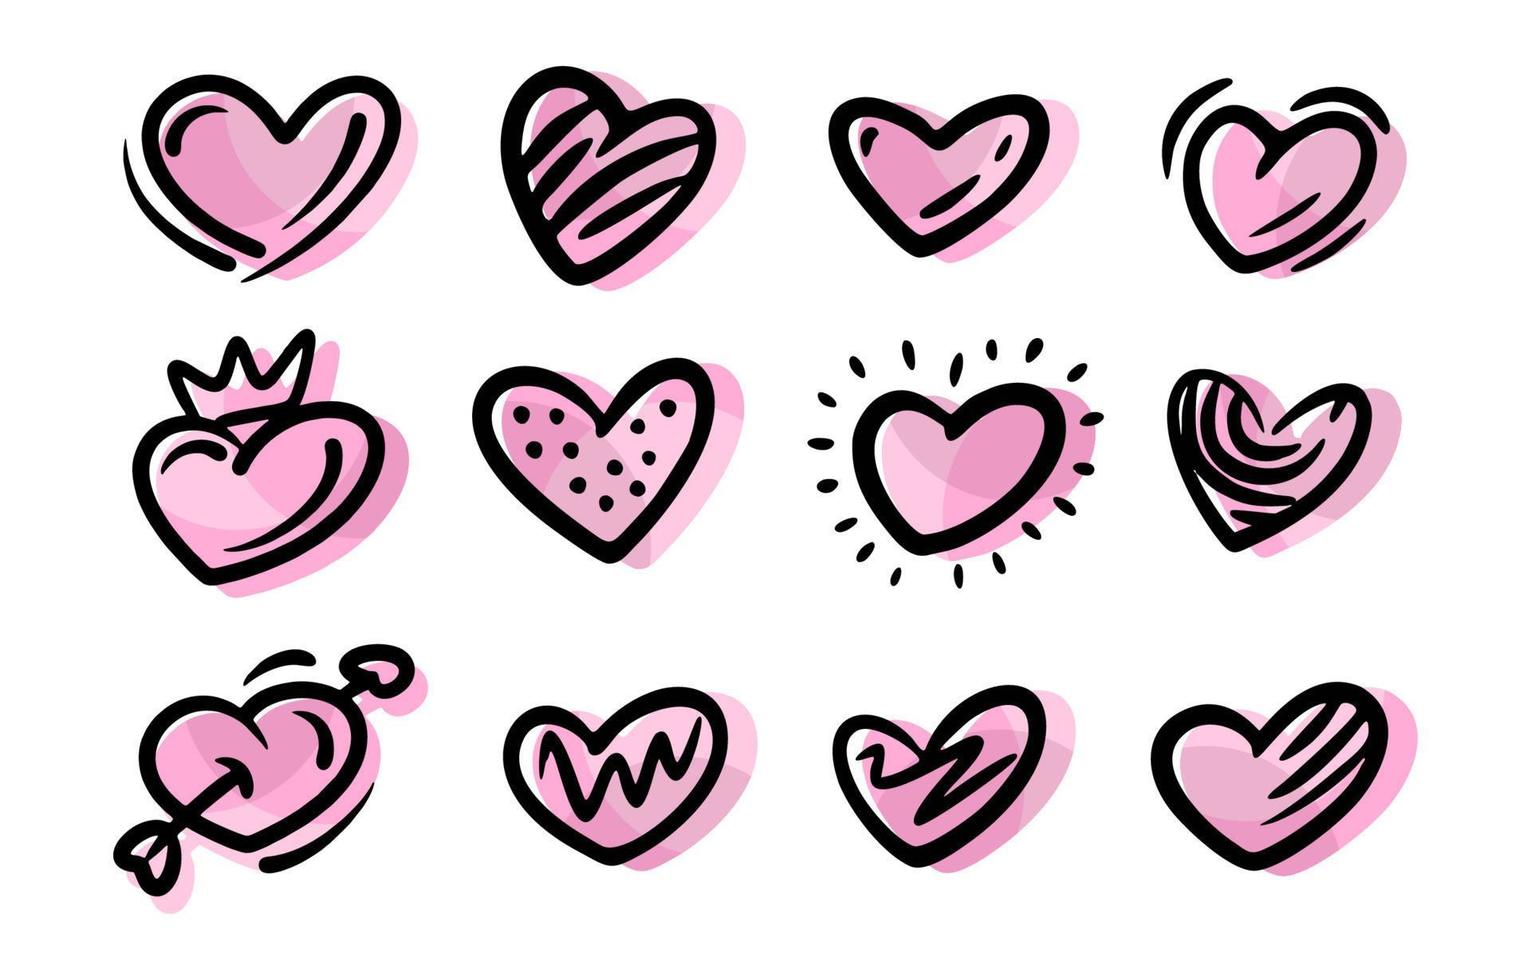 Doodle Heart Icons Set vector